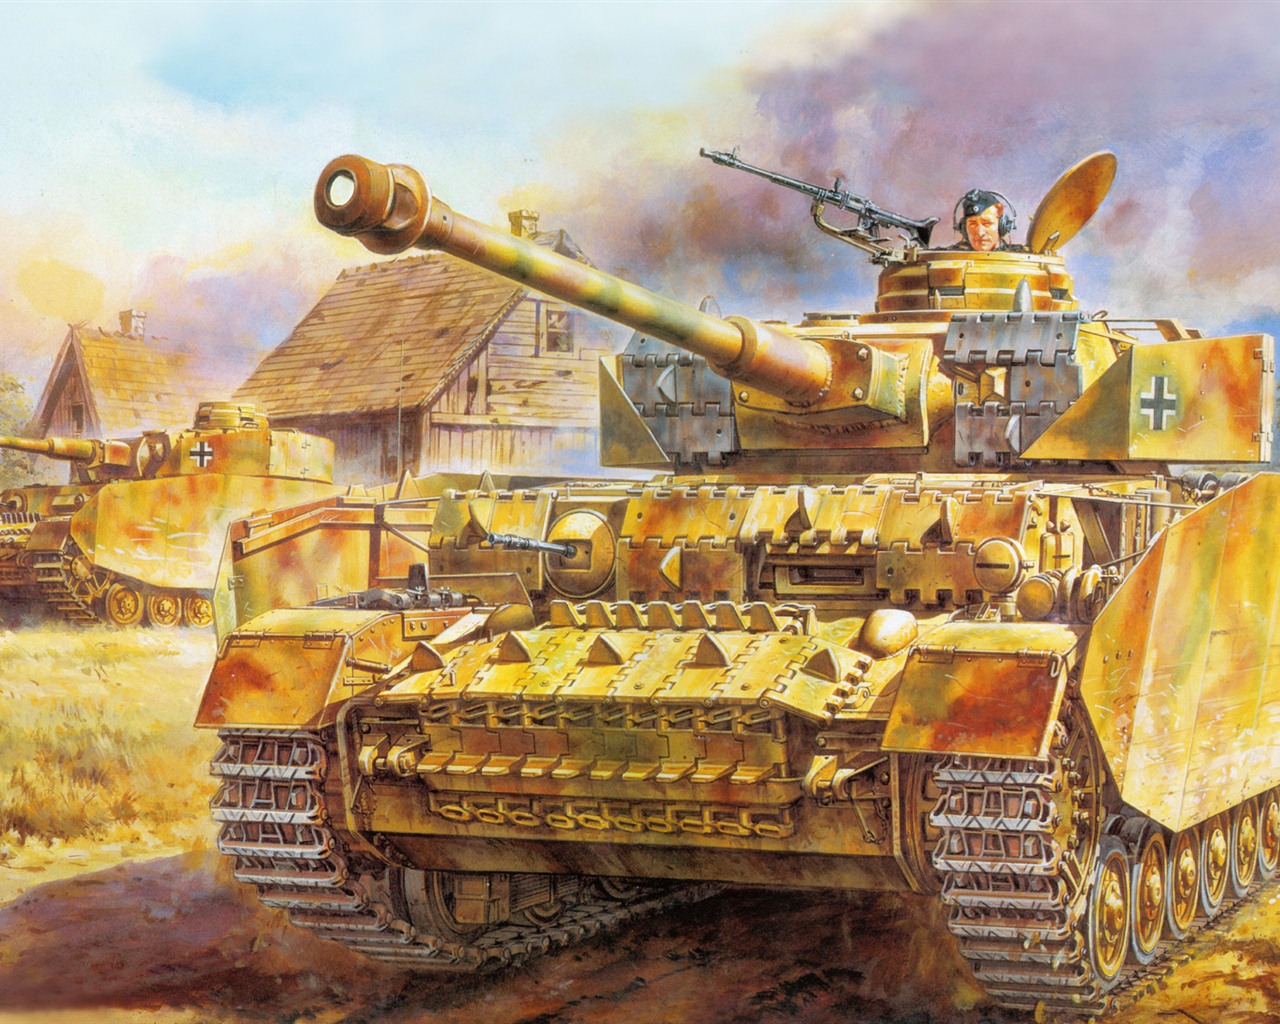 Military tanks, armored HD painting wallpapers #13 - 1280x1024